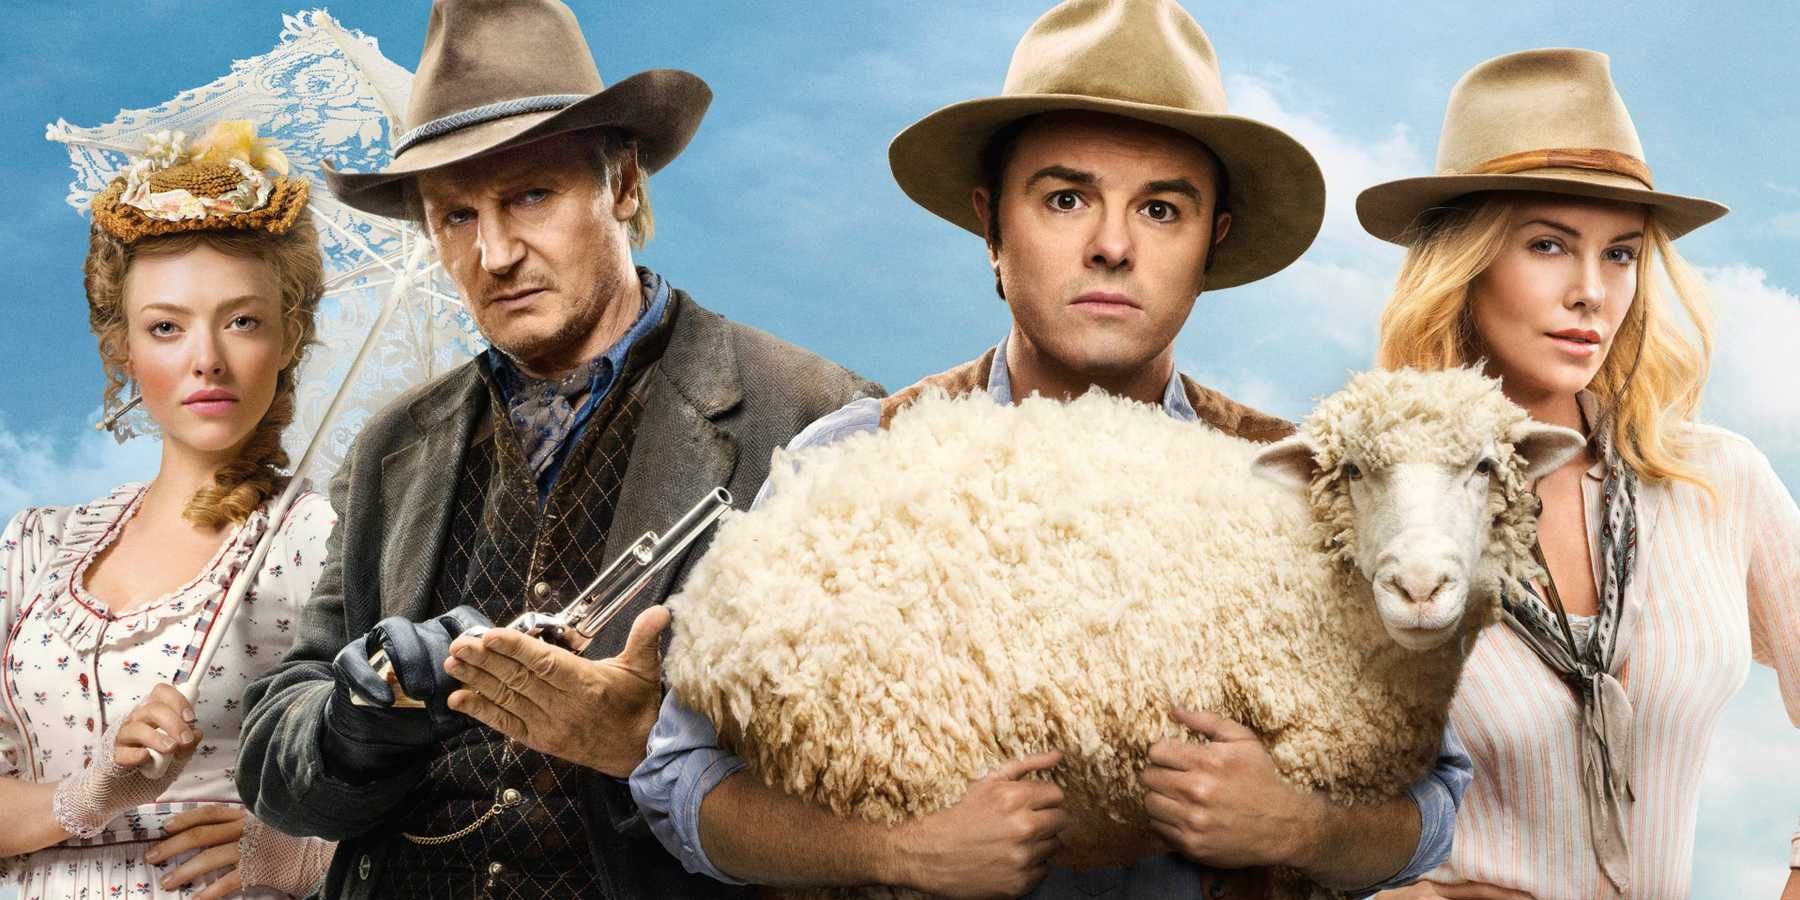 A Million Ways To Die In The West promo image.